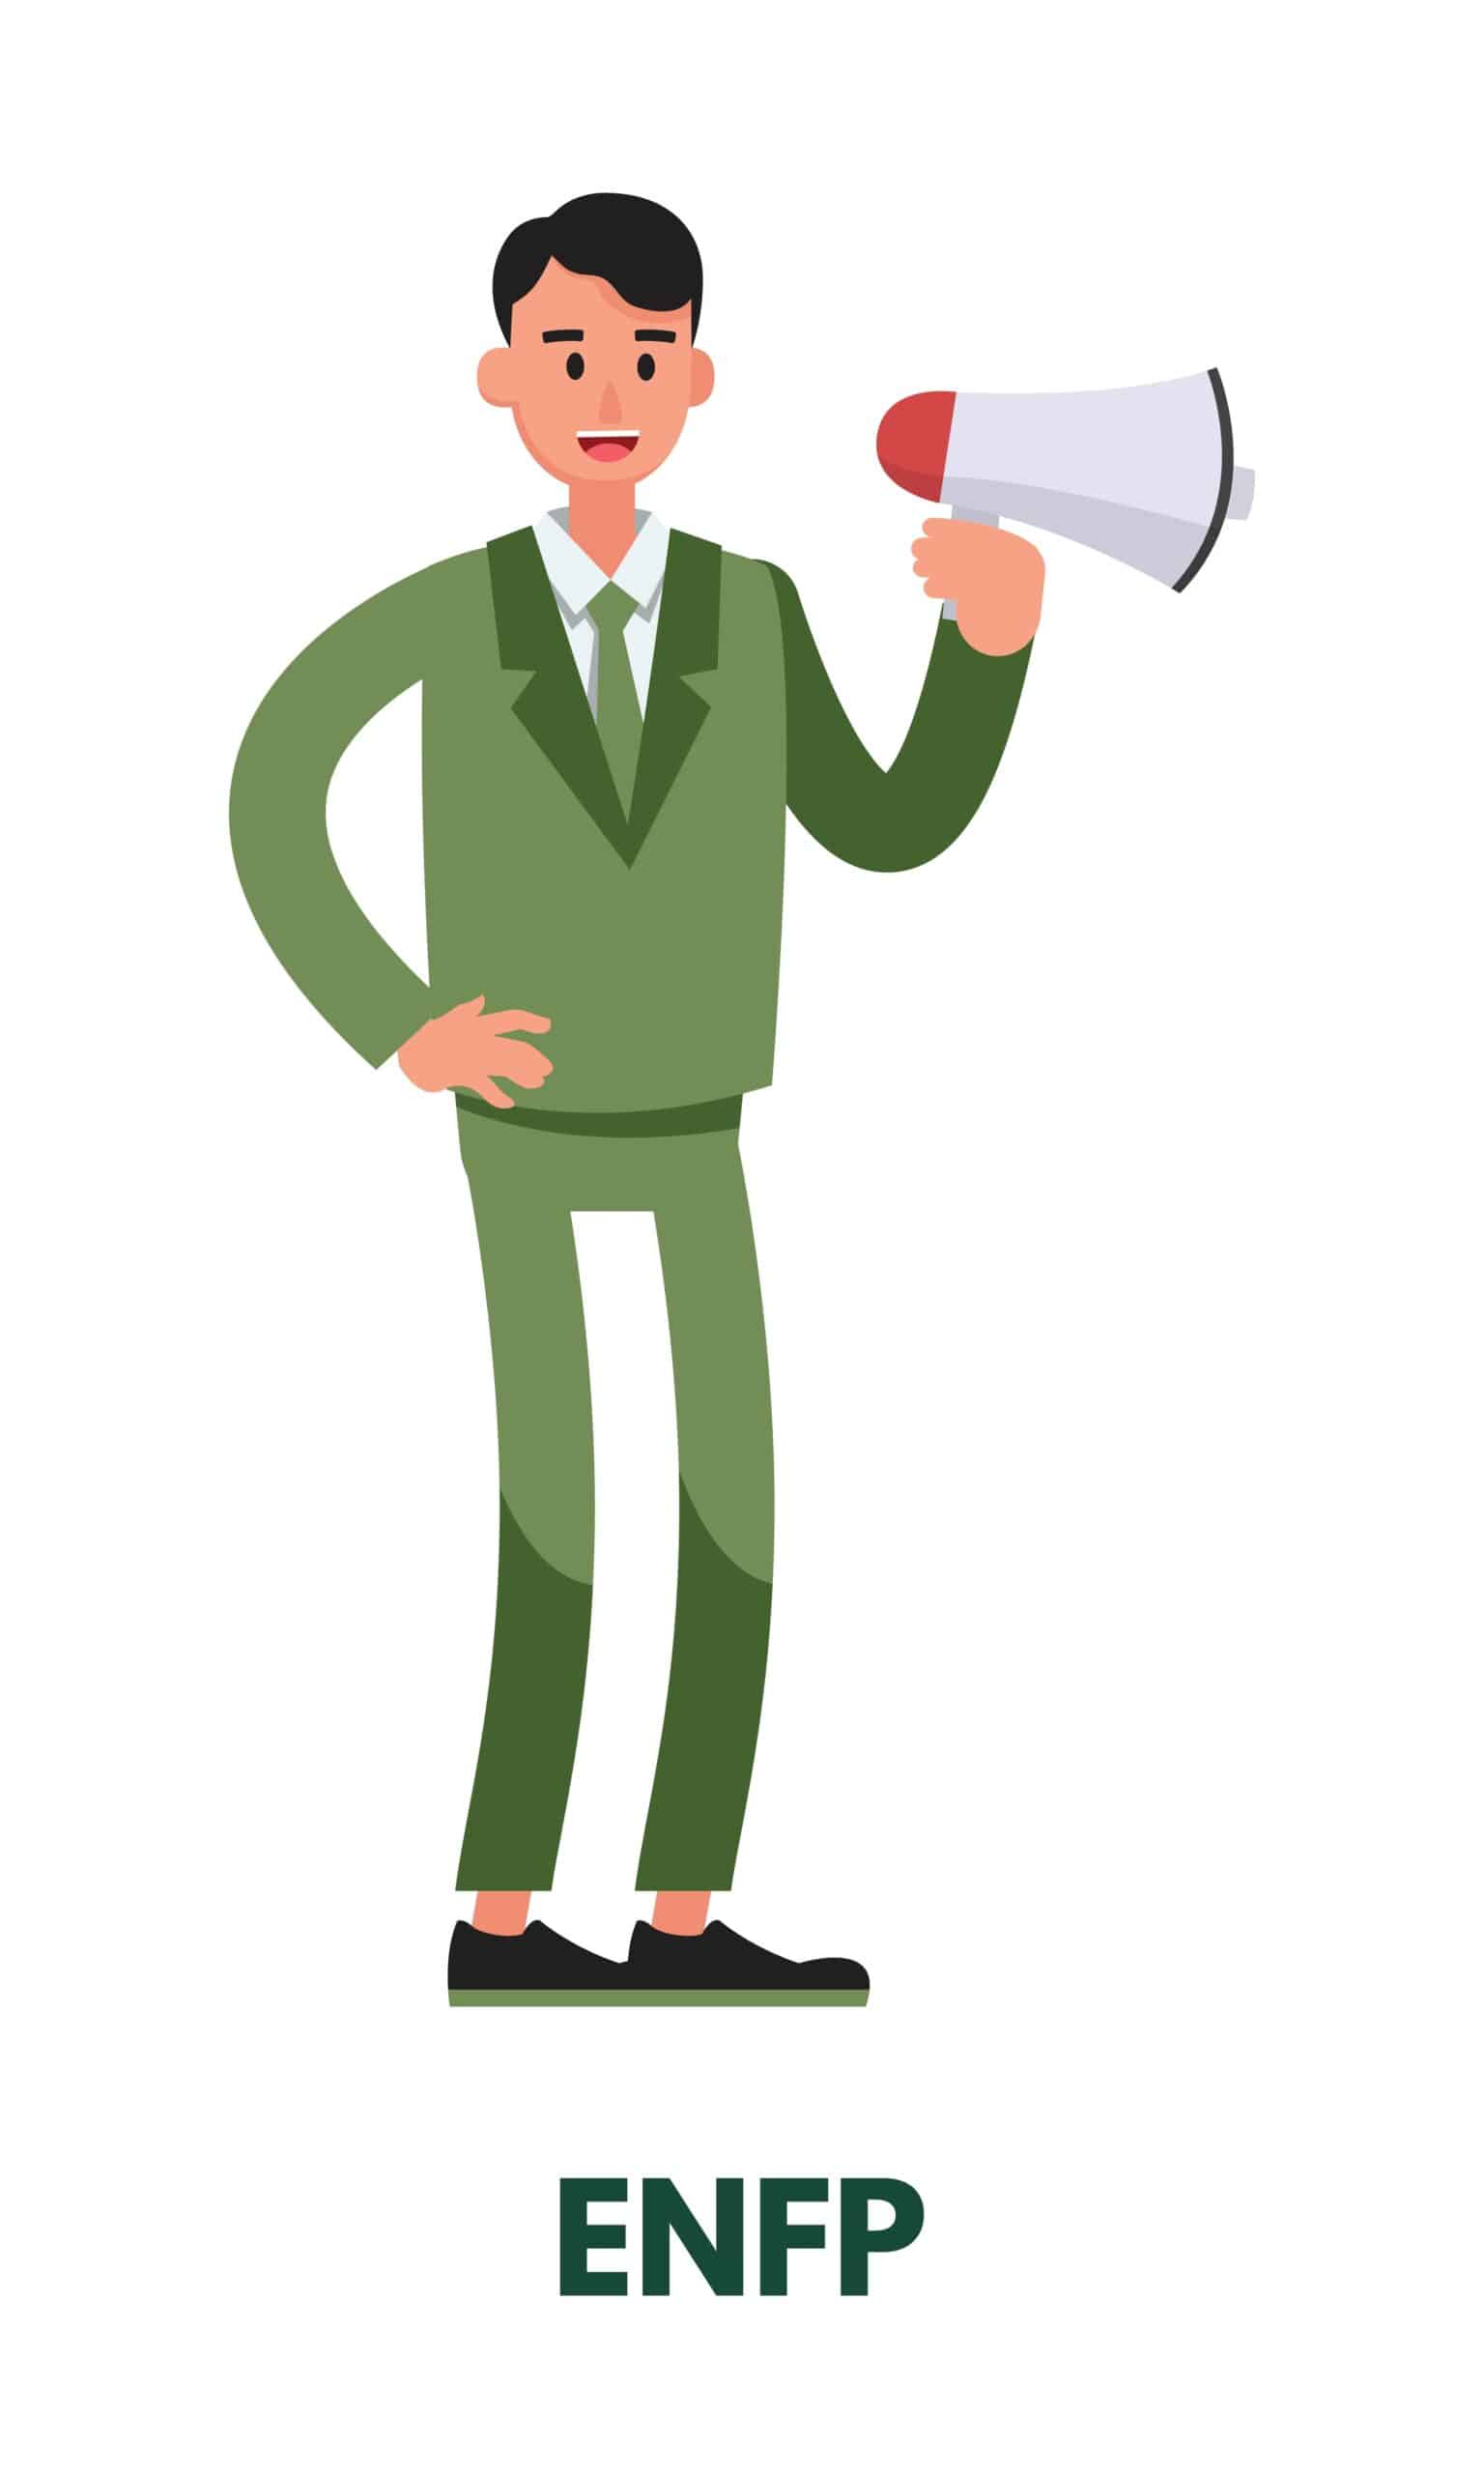 Male,Campaigner,Talking,While,Holding,A,Megaphone,Representing,Enfp,Diplomats